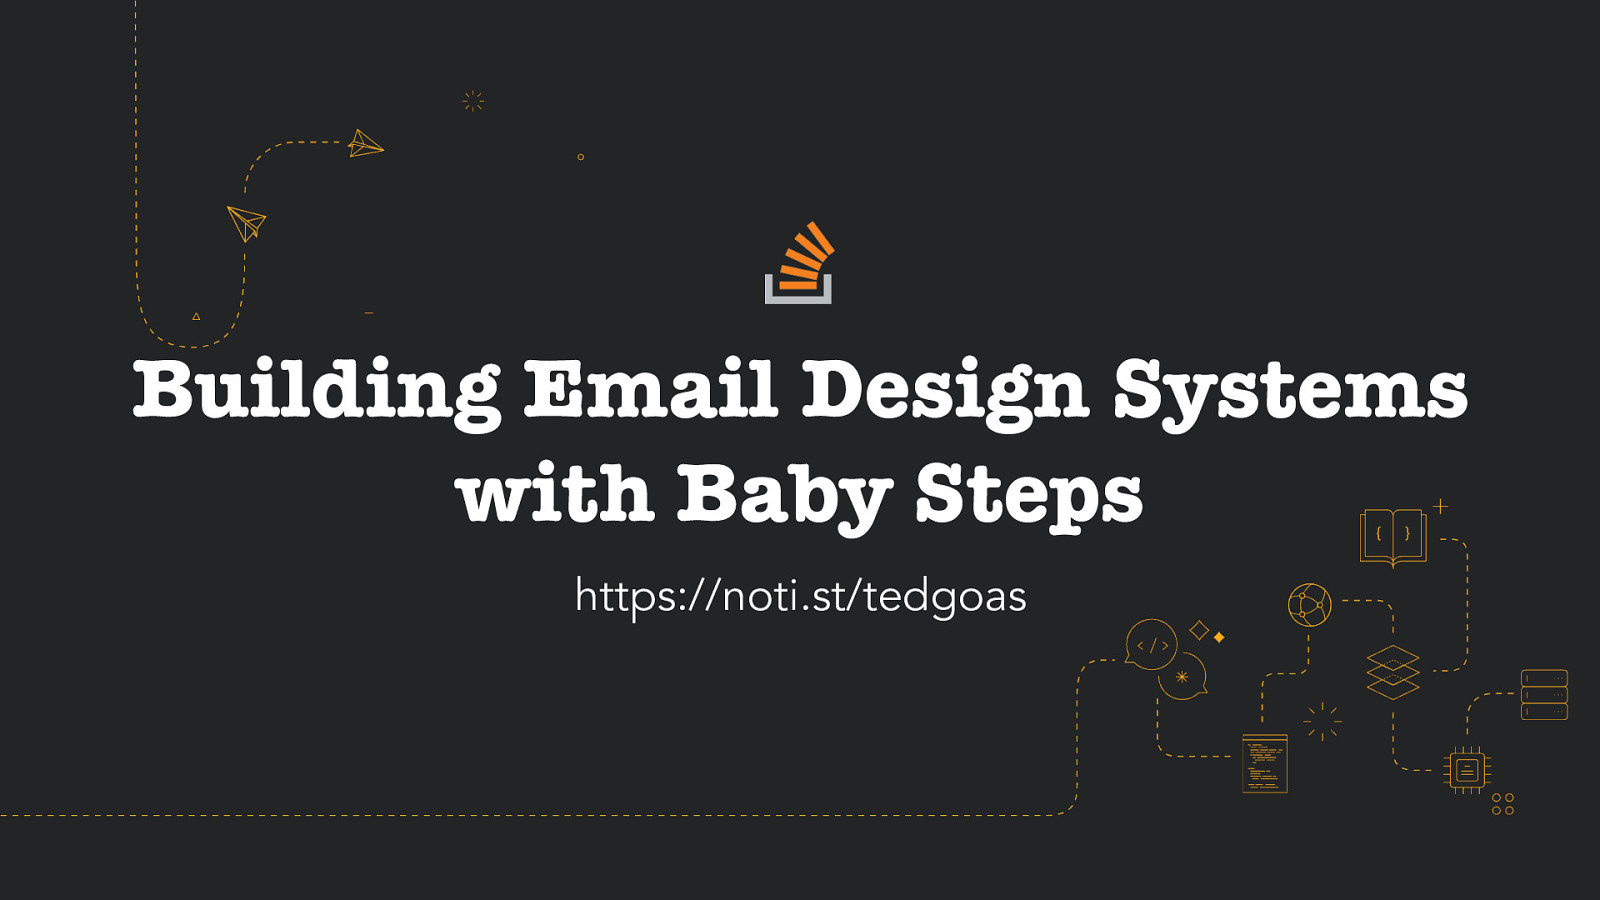 Building Email Design Systems with Baby Steps